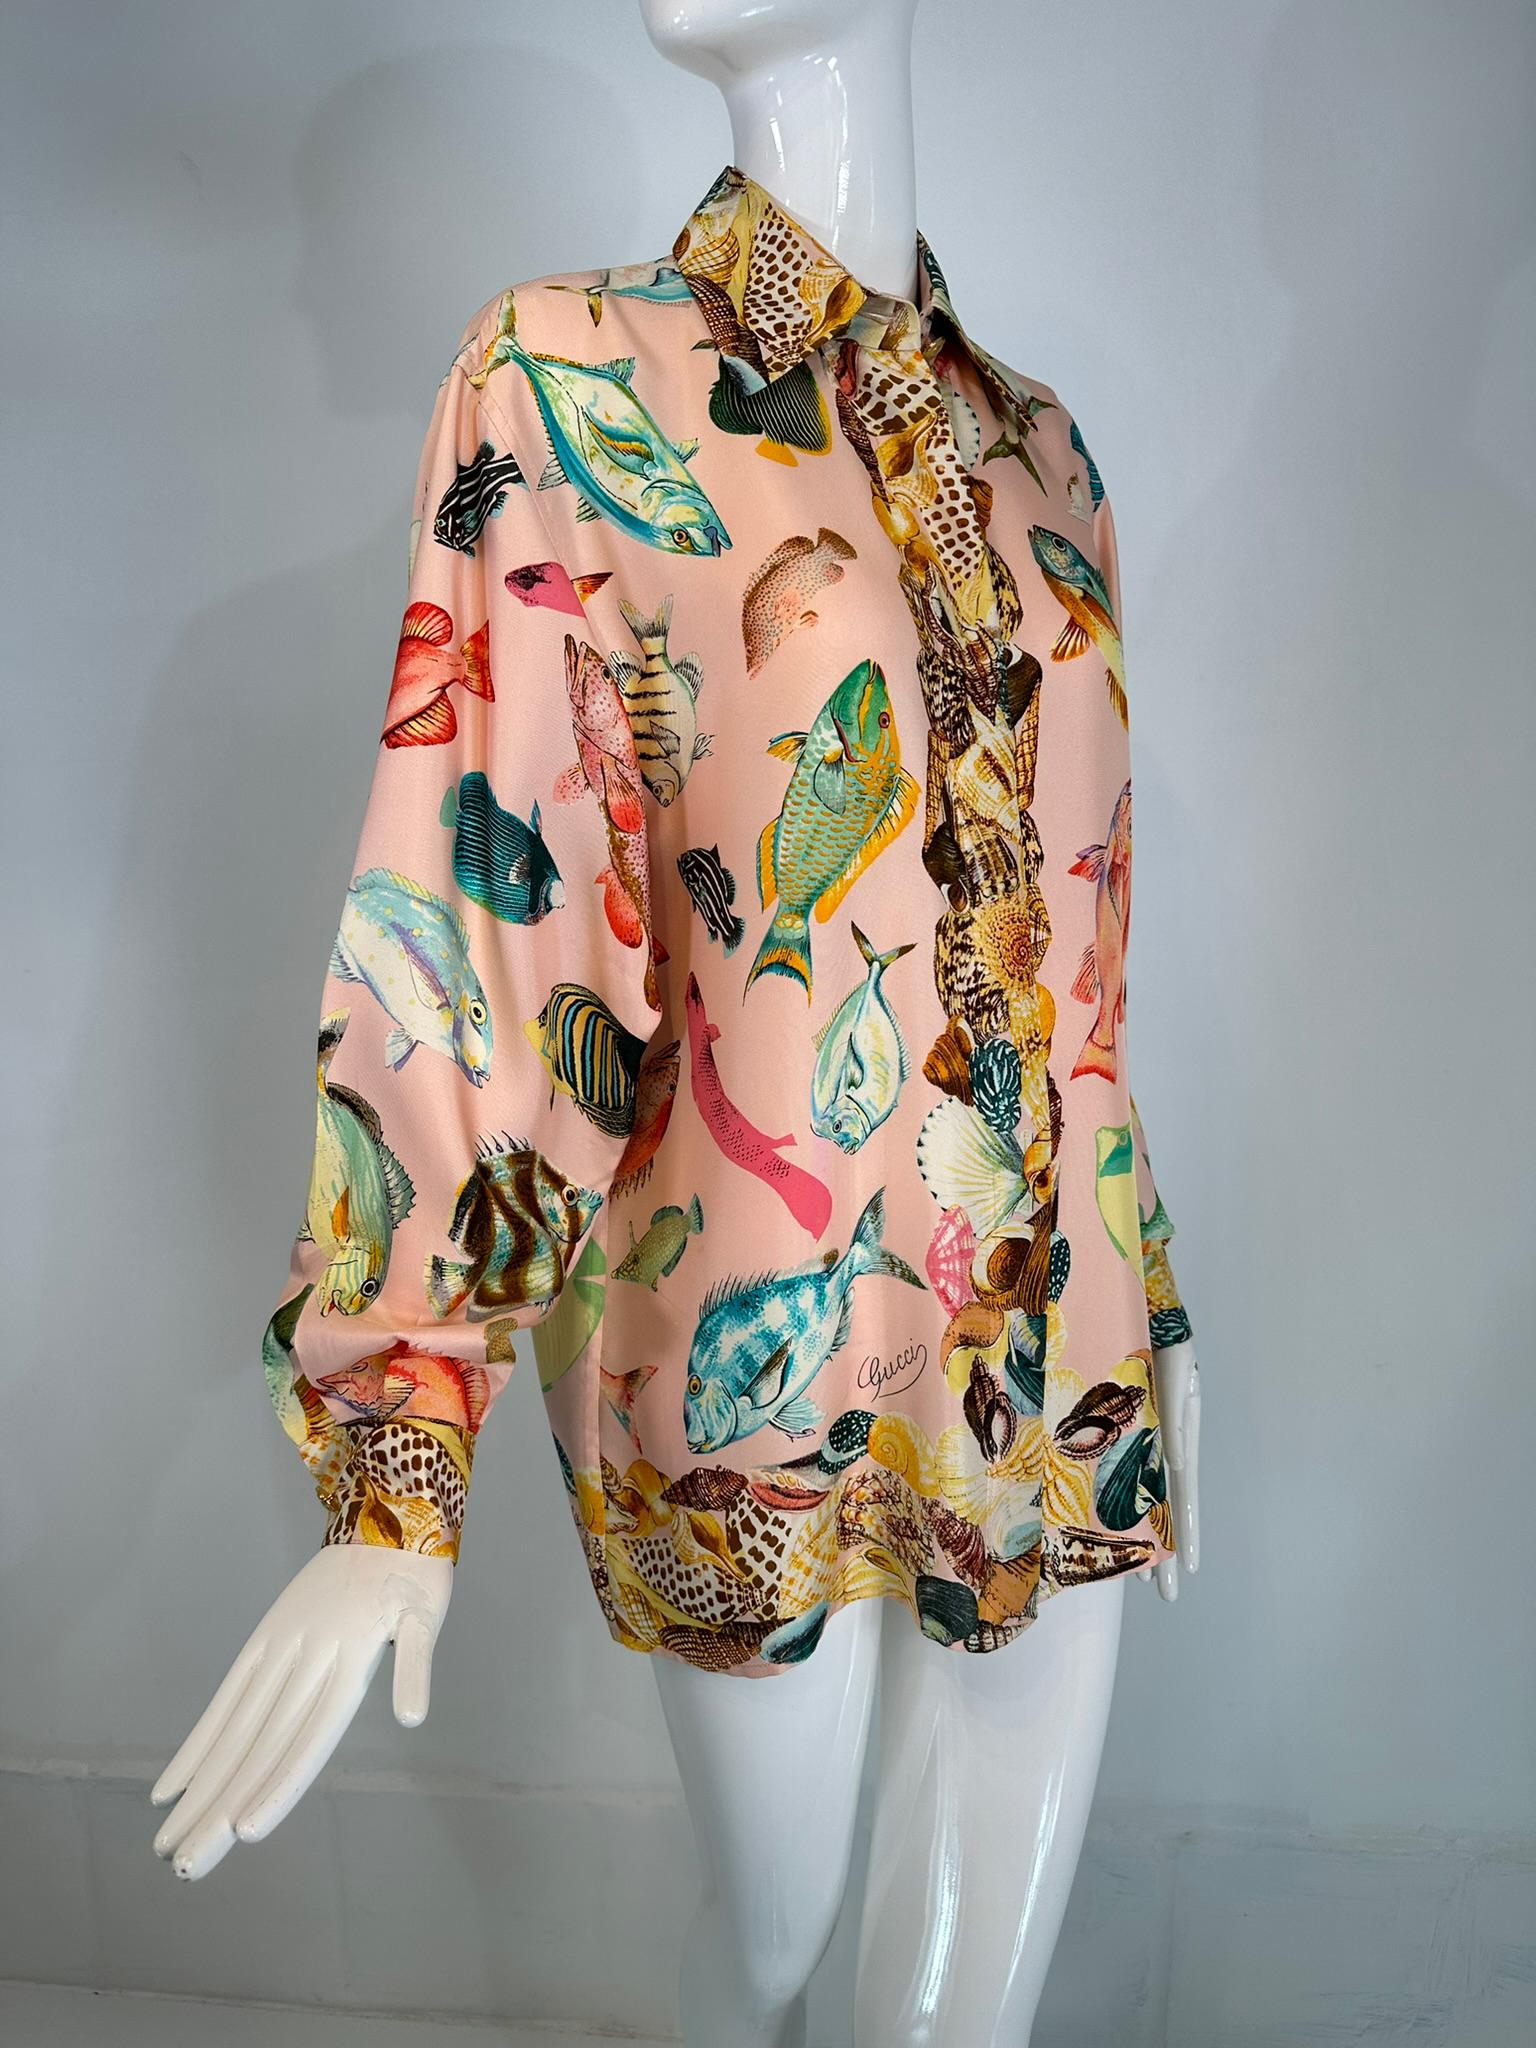 Gucci S/S 1992 runway pink silk twill fish & sea shells print, oversize shirt/tunic 42.  Rare to find, from 1992. Schools of fish scattered across a pale pink ground, the borders and facings are done in collections of sea shells.
Big shirts were the